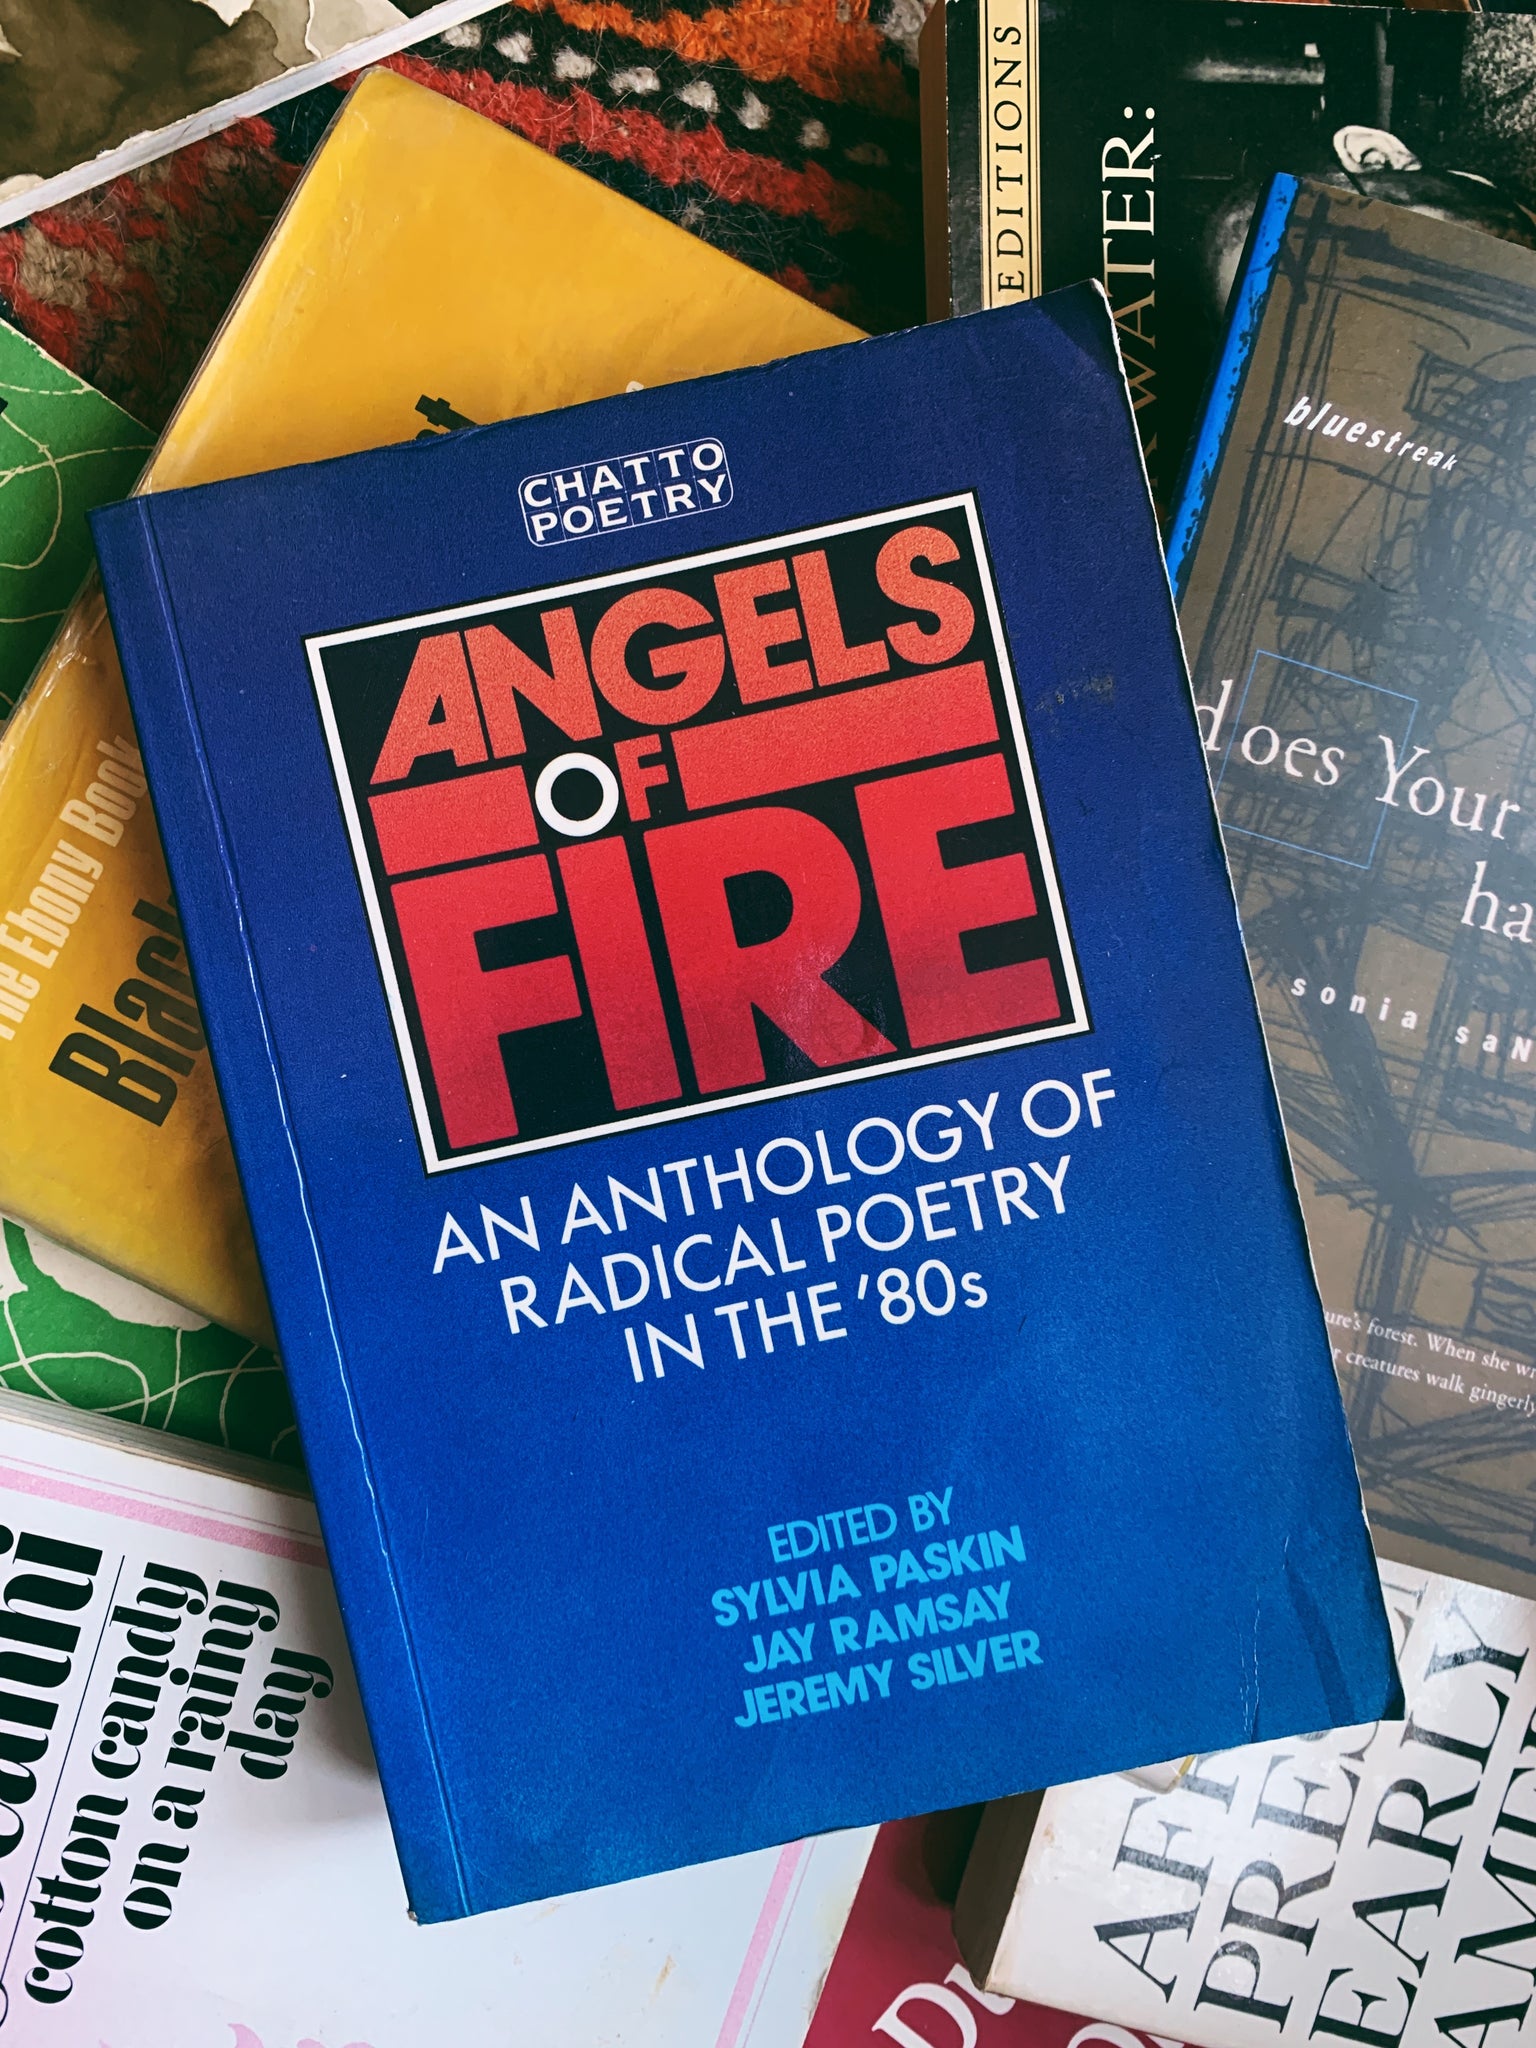 Vintage Hardcover "Angels of Fire: Anthology of Radical Poetry in the 80's" (1986)